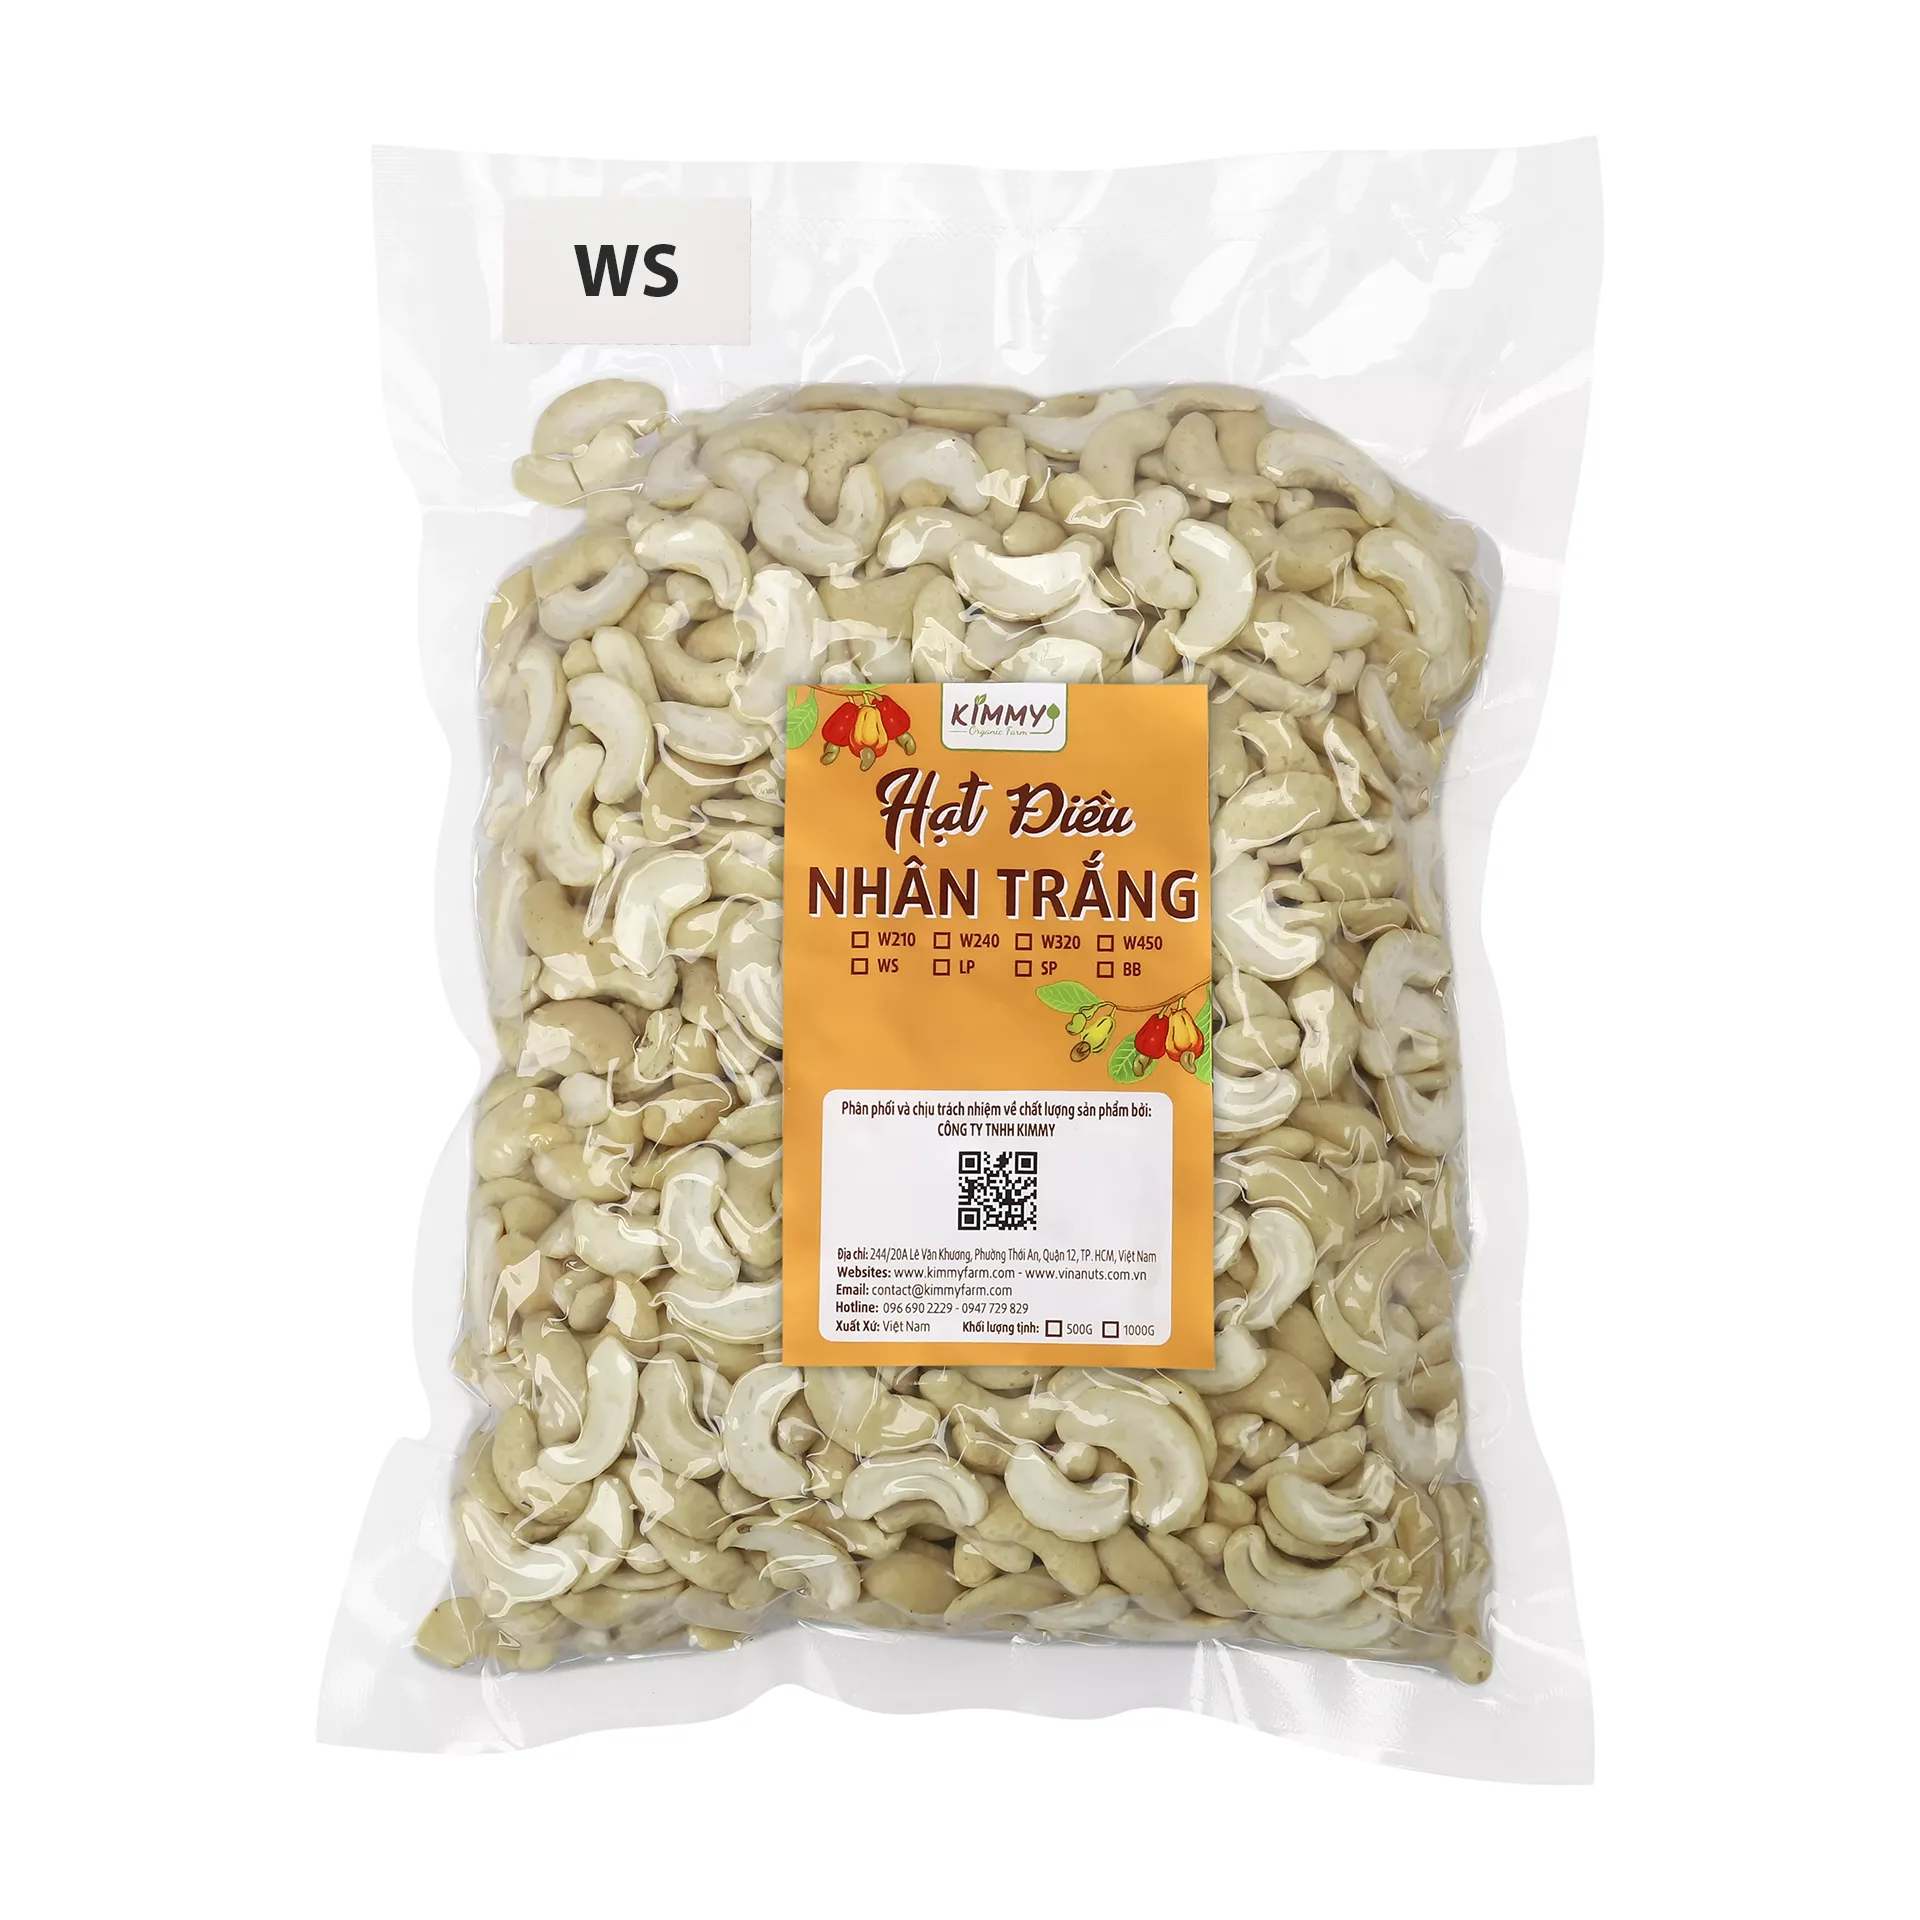 WS Cashew With 1st Quality – 1KG Packed in Vacuum Bags – Kimmy Farm Vietnam